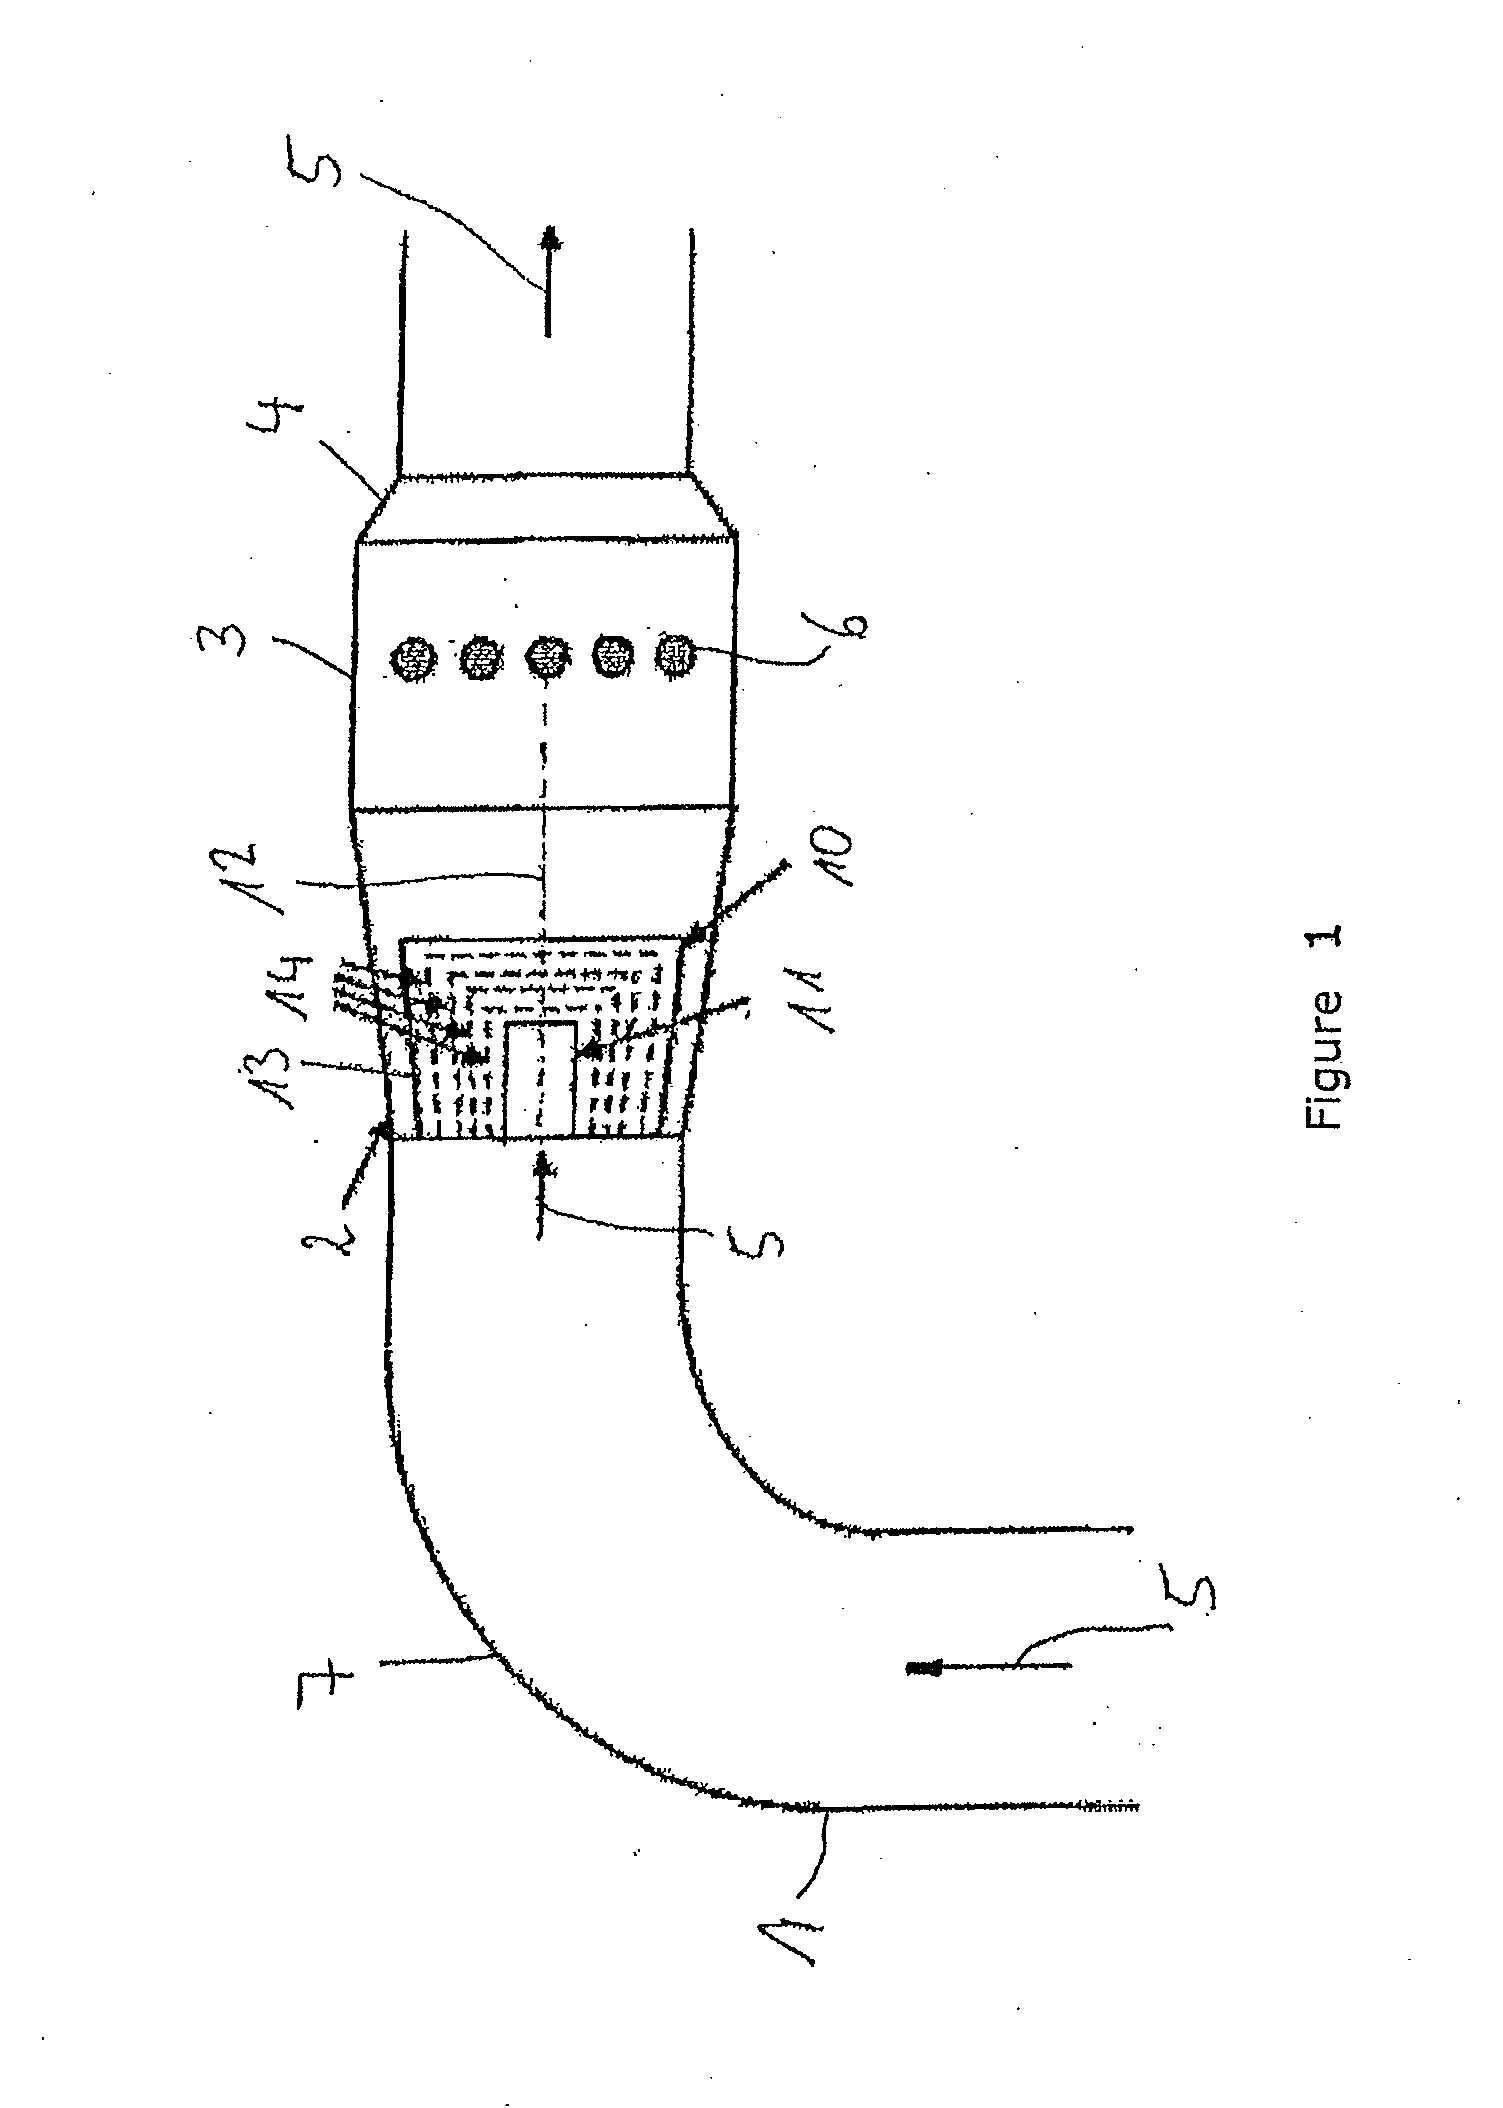 Flow rectifier for closed pipelines